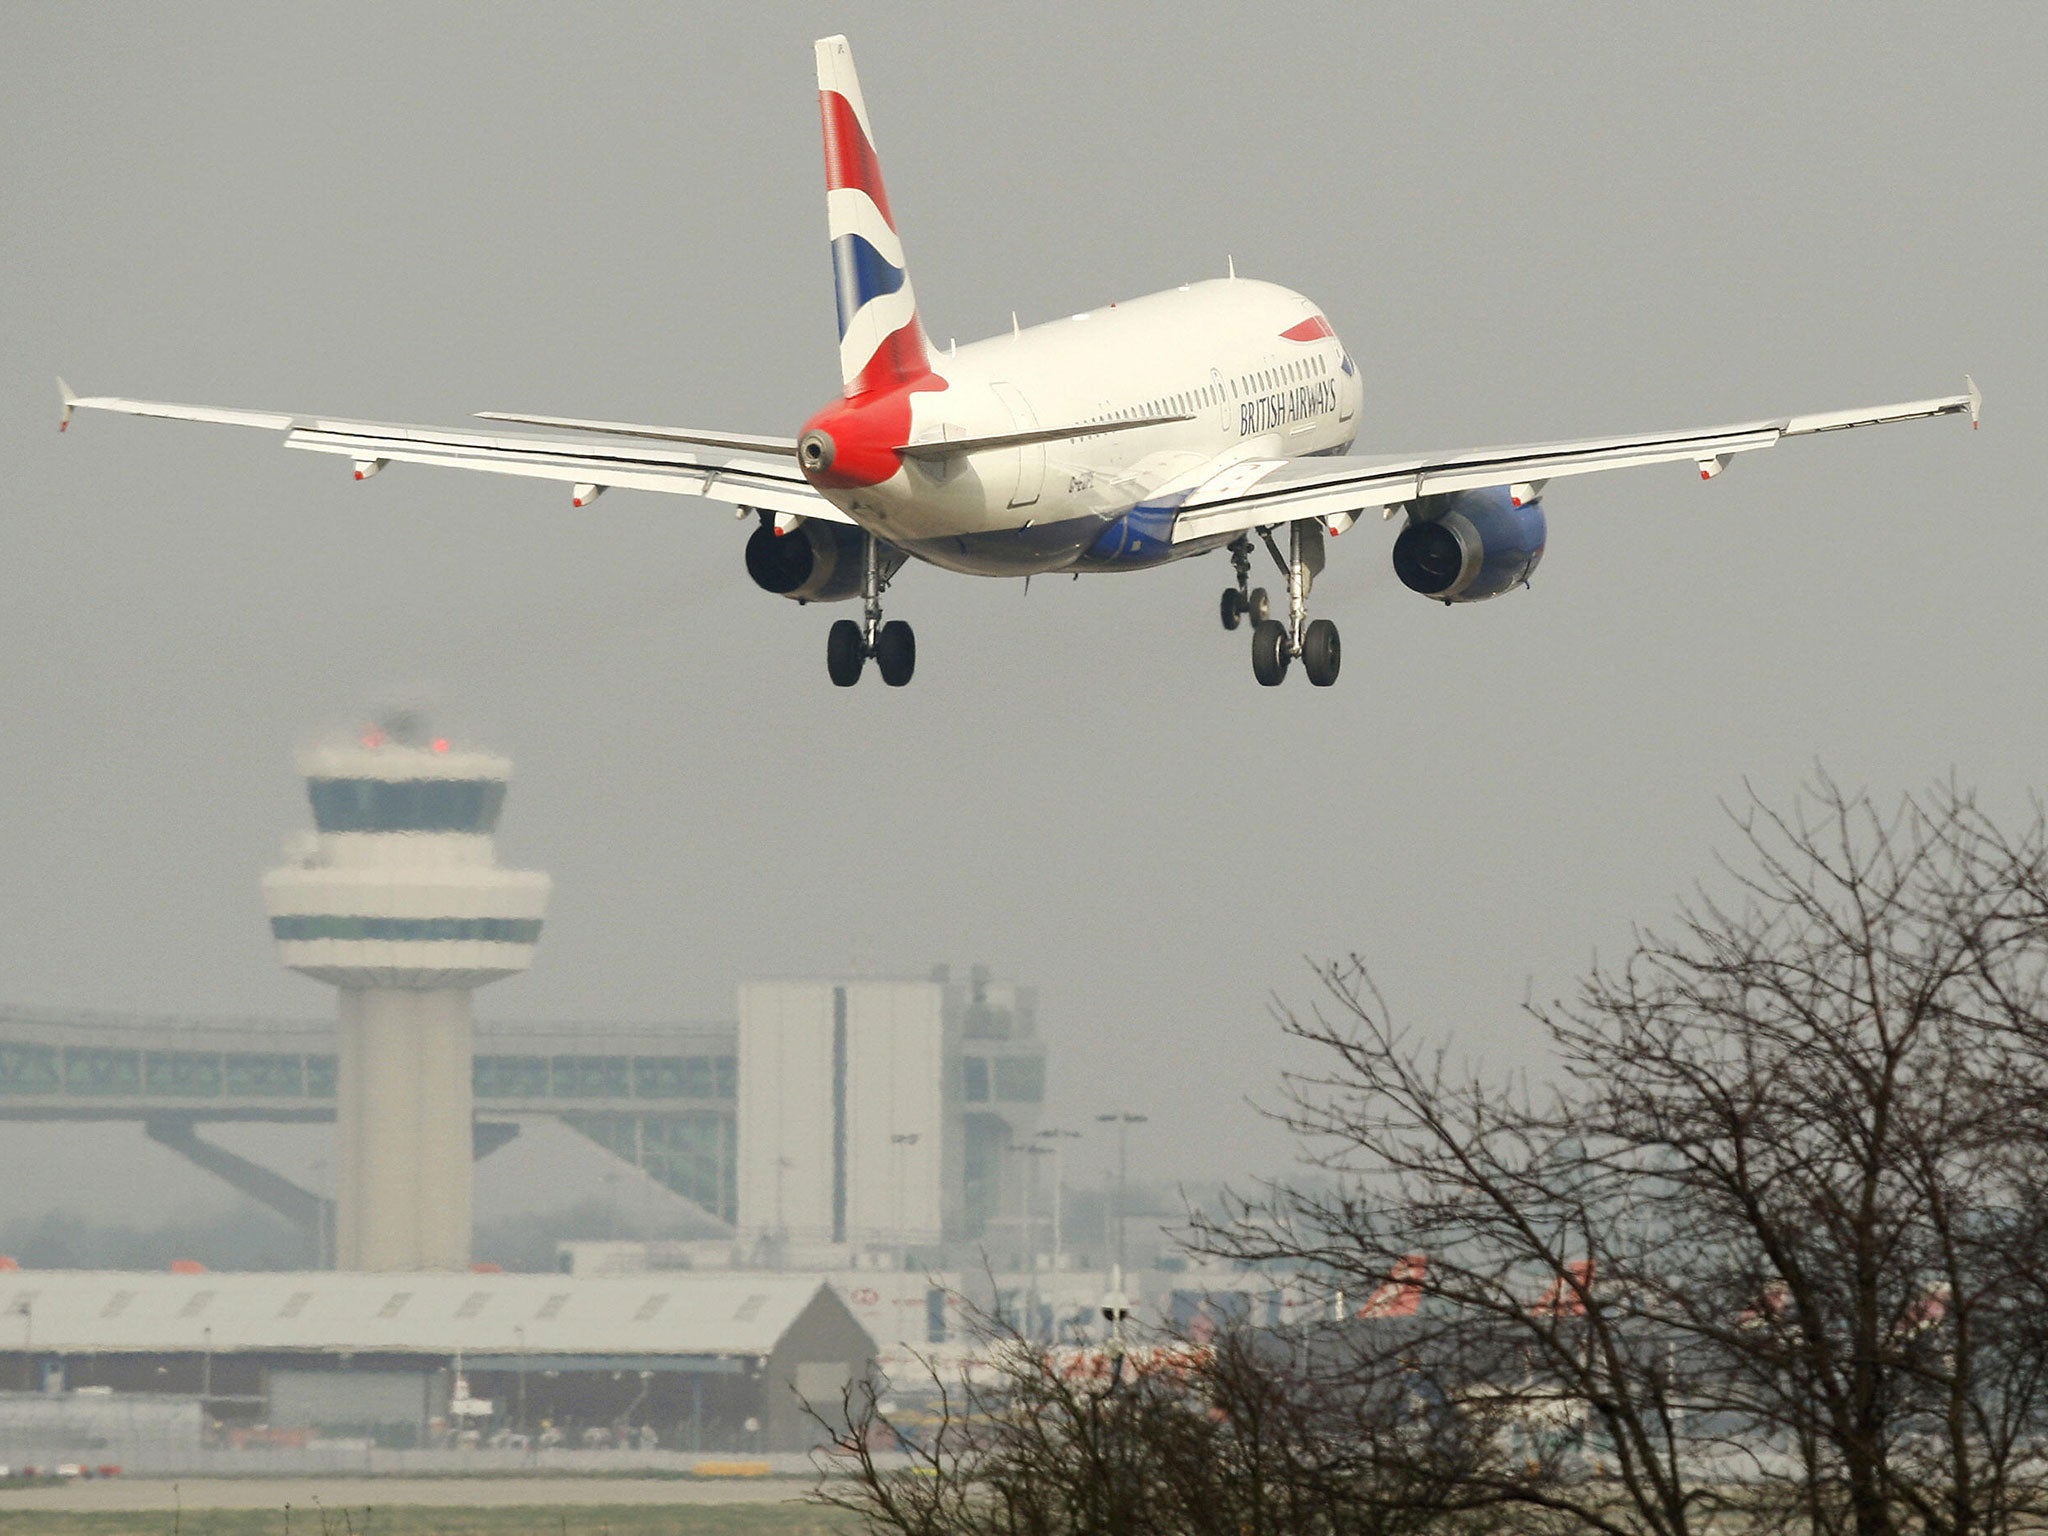 All BA early BA flights to Rome are sold out